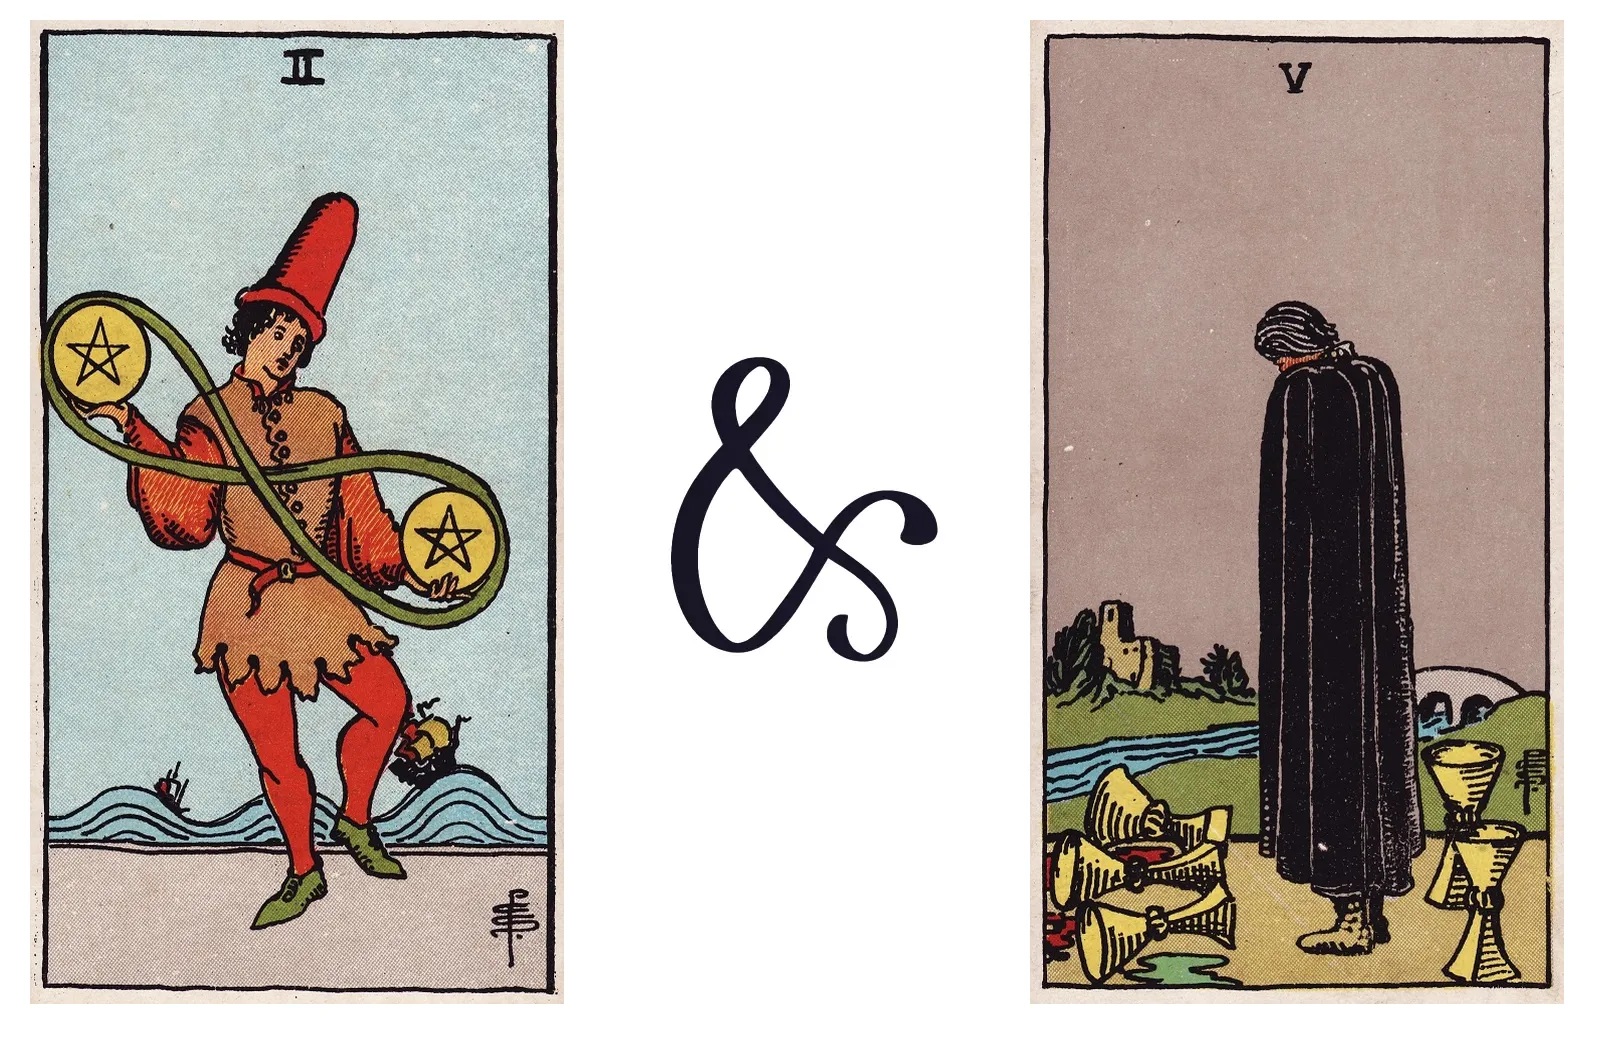 Two of Pentacles and Five of Cups